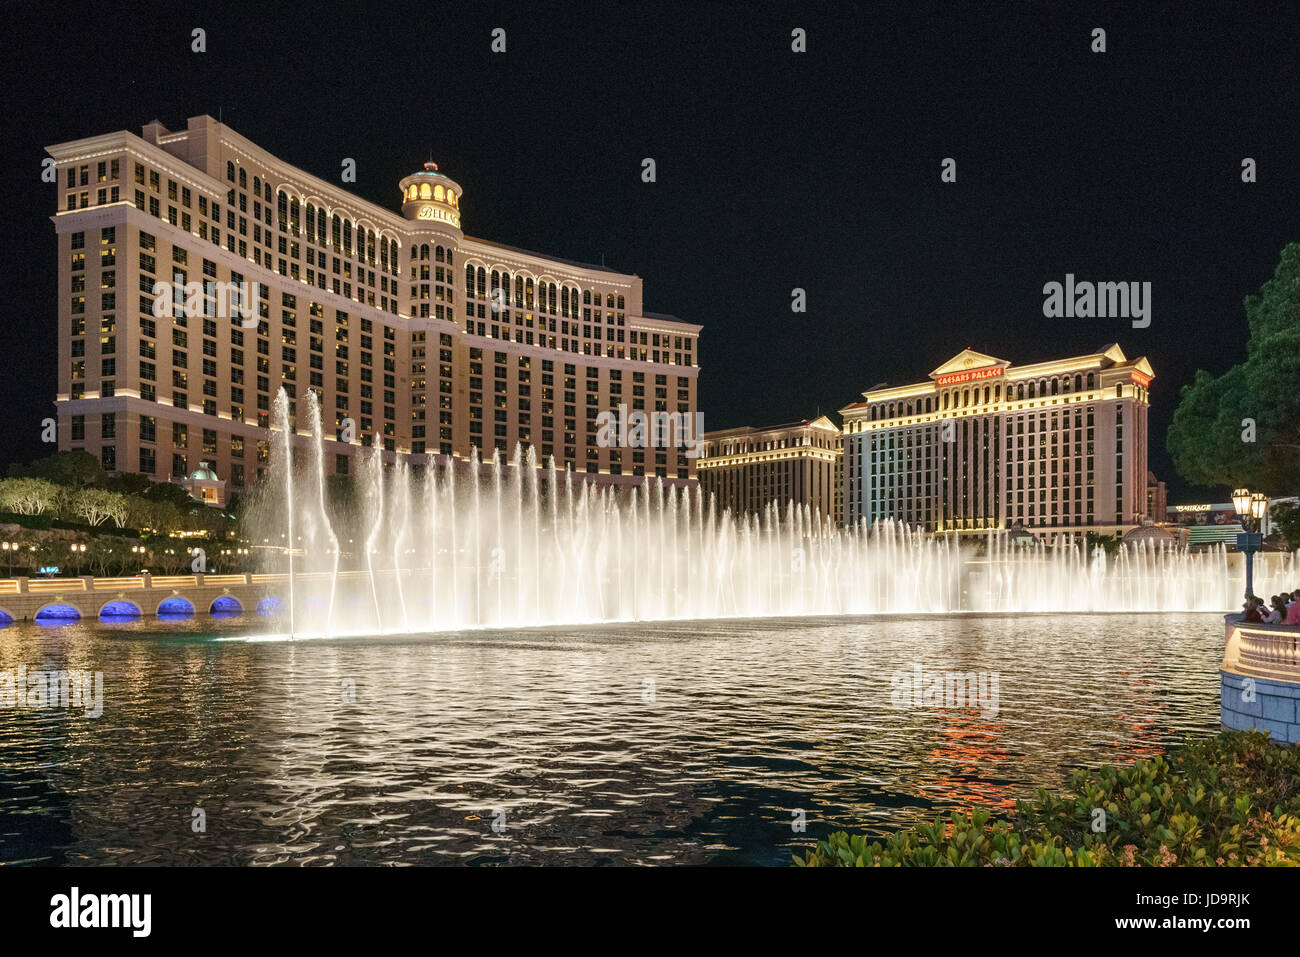 Exterior view of Bellagio hotel at night with fountains, Las Vegas, Nevada, USA. Stock Photo